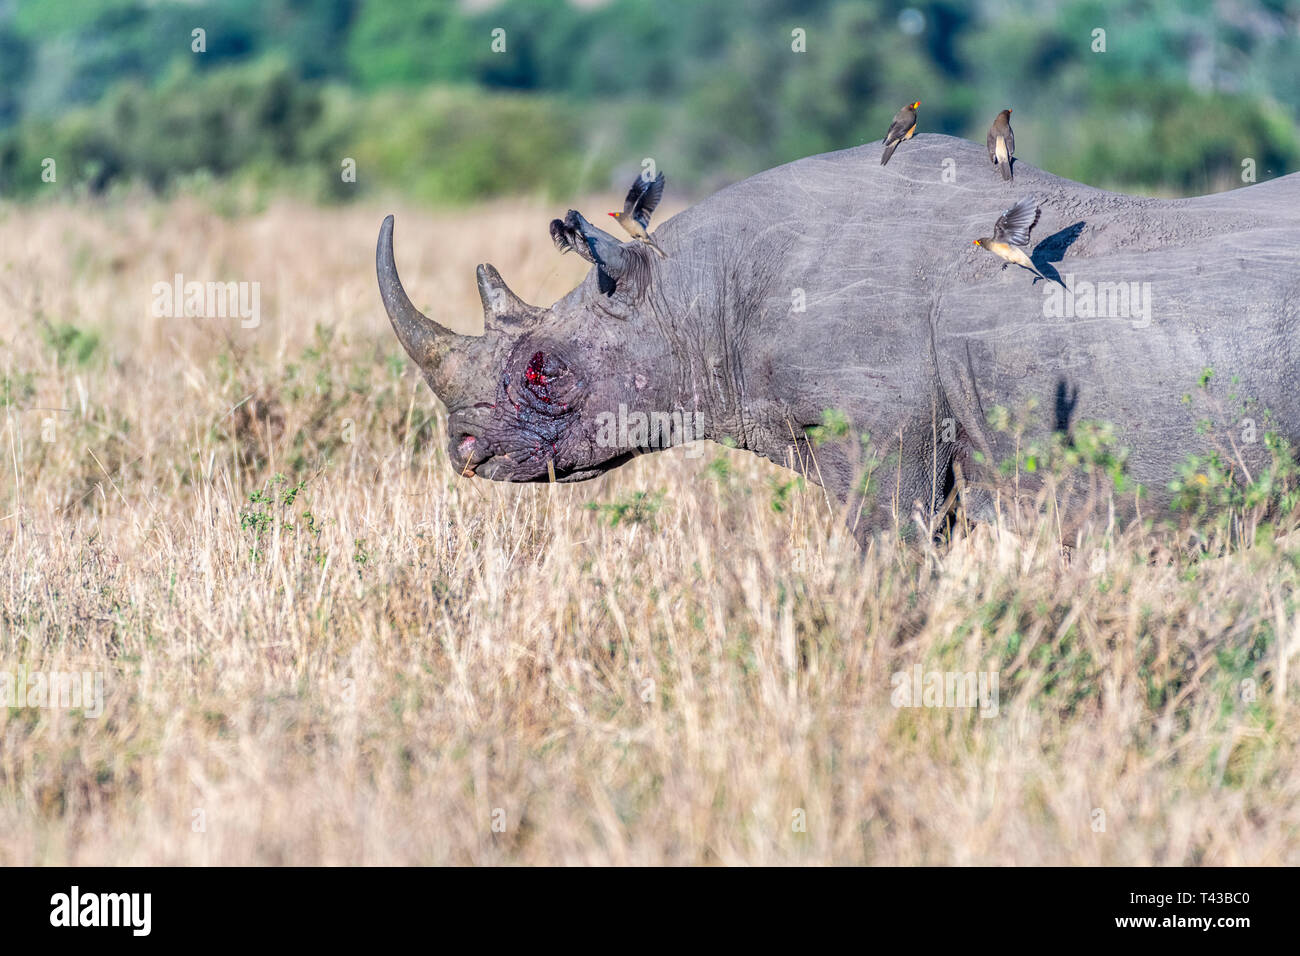 Bleeding rhino after fight and birds flying on its back in Maasai Mara Stock Photo